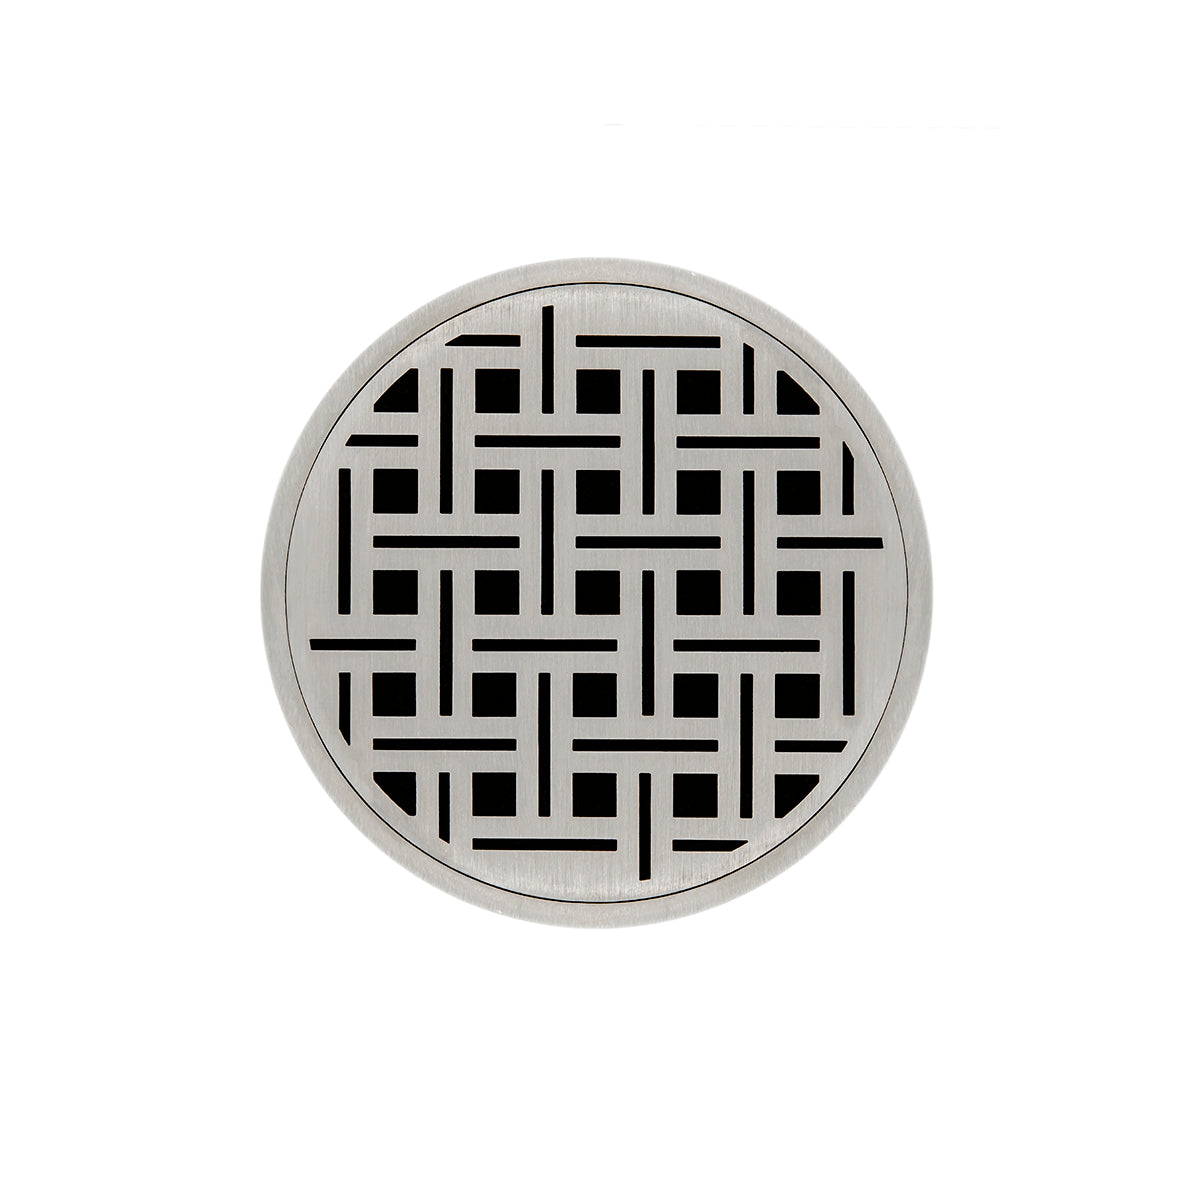 Infinity Drain 5" Round RVD 5 Premium Center Drain Kit with Weave Pattern Decorative Plate with PVC Drain Body, 2" Outlet